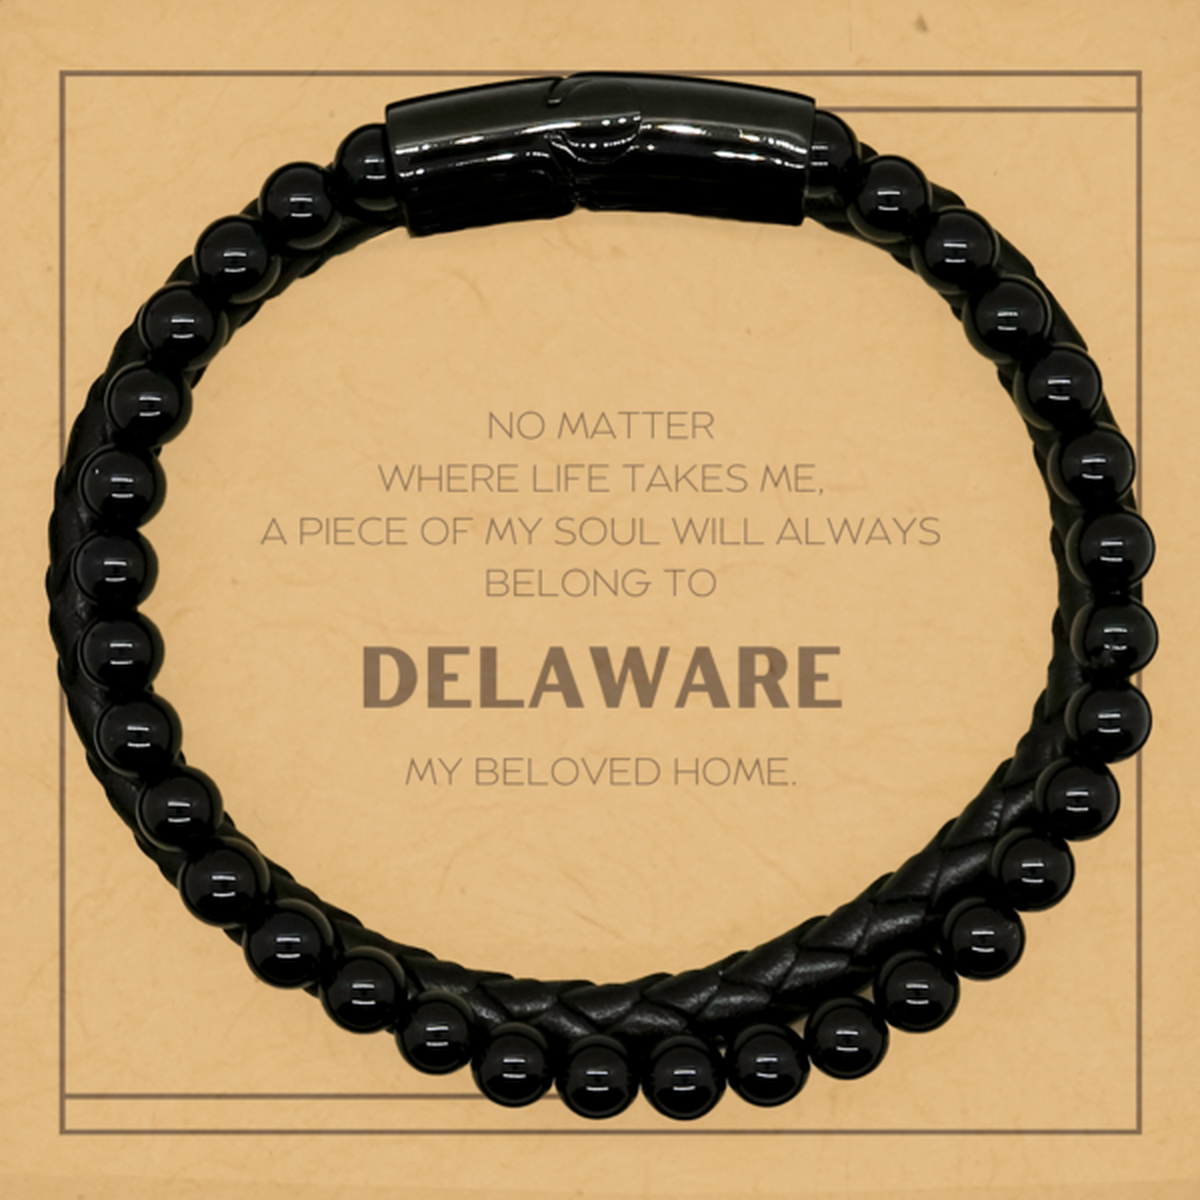 Love Delaware State Gifts, My soul will always belong to Delaware, Proud Stone Leather Bracelets, Birthday Unique Gifts For Delaware Men, Women, Friends